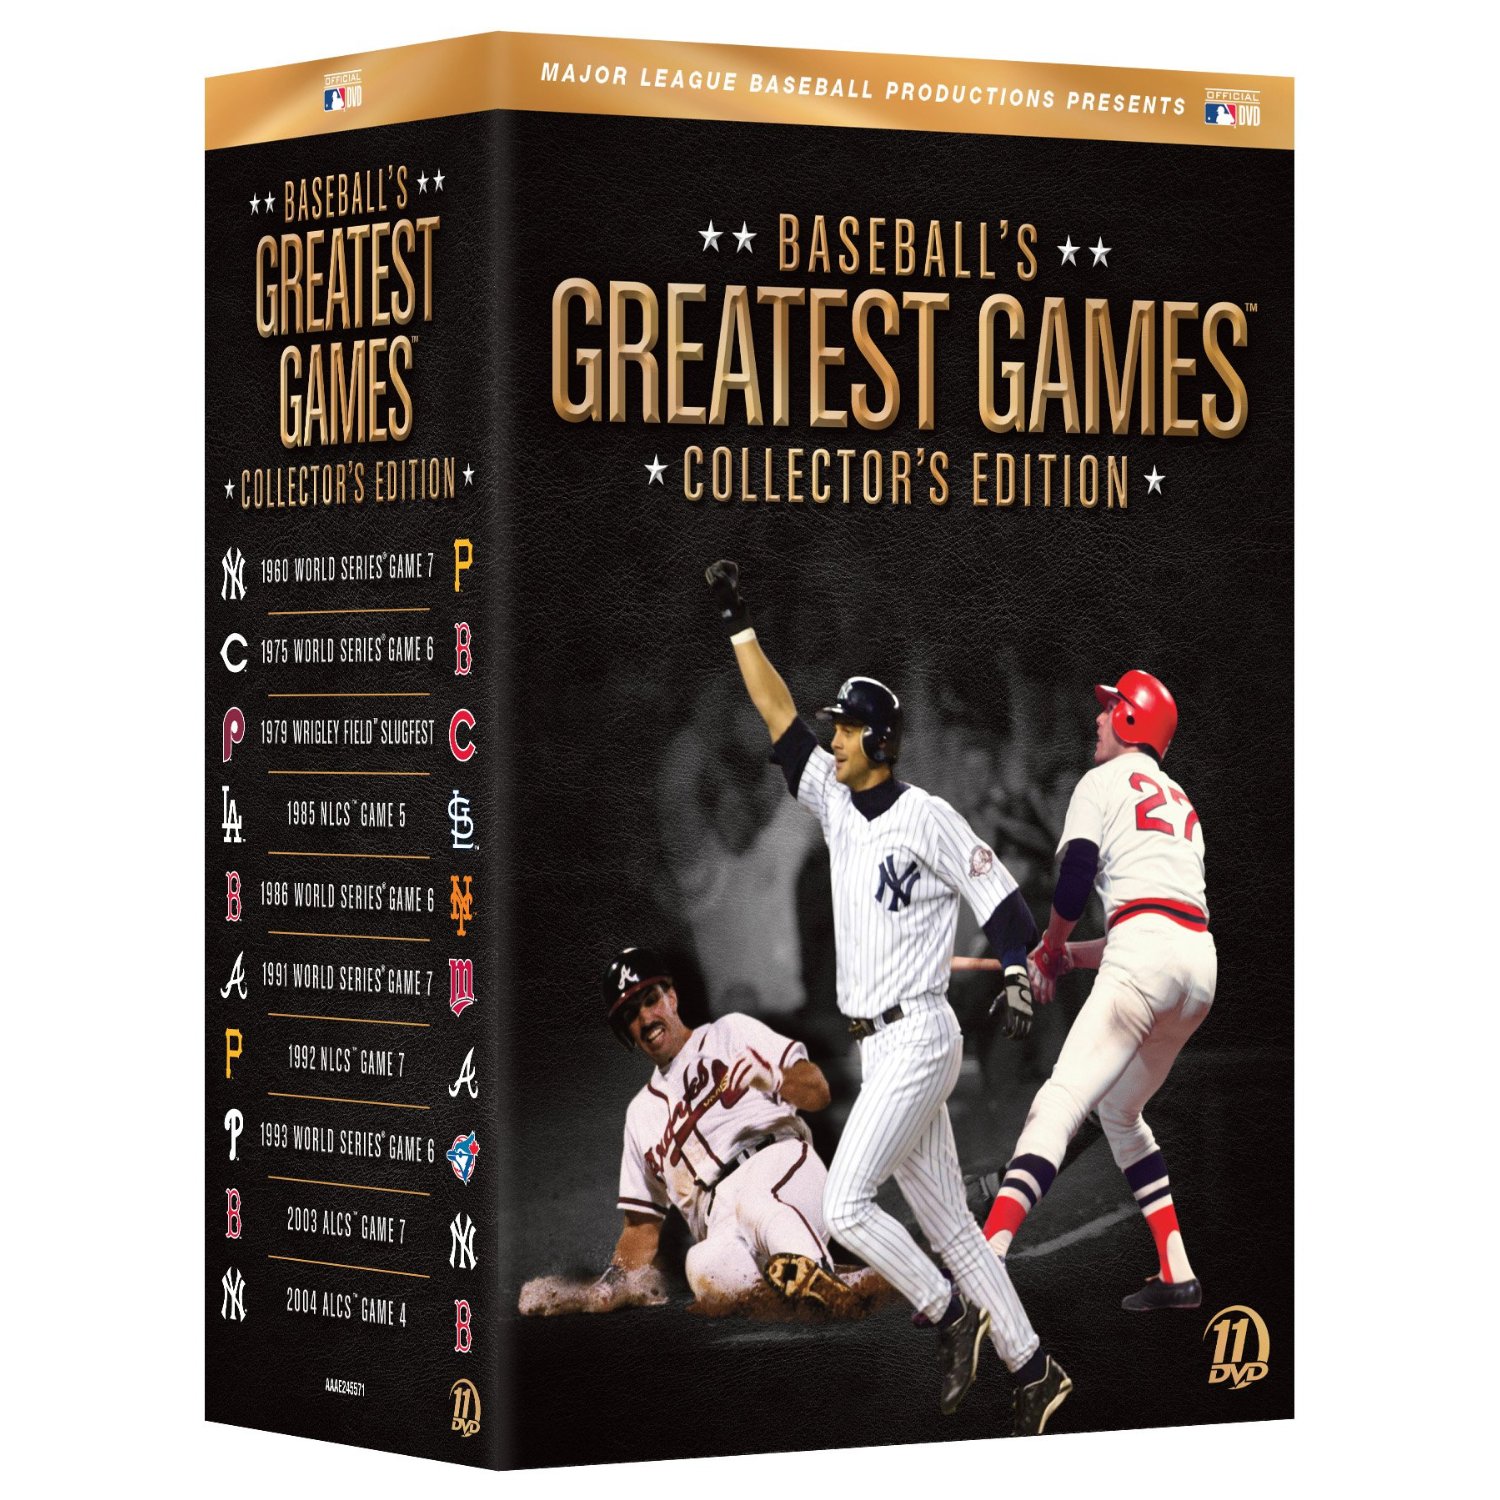 DVD Review: Baseball's Greatest Games-Collector's Edition